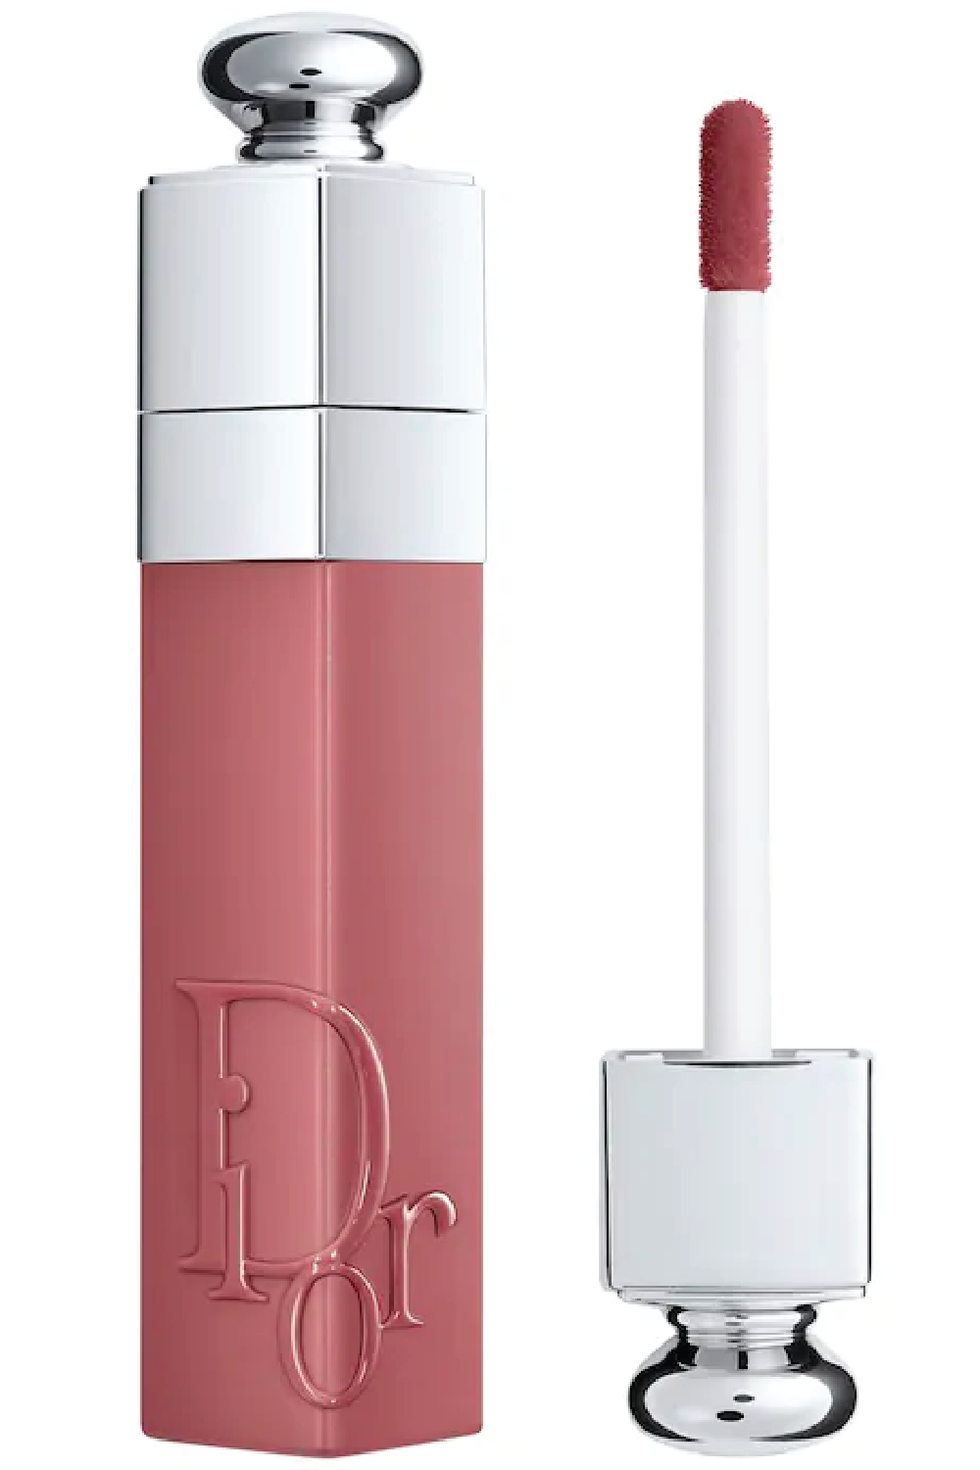 This Longtime Chanel Favorite Lip Gloss Is No Longer for Sale